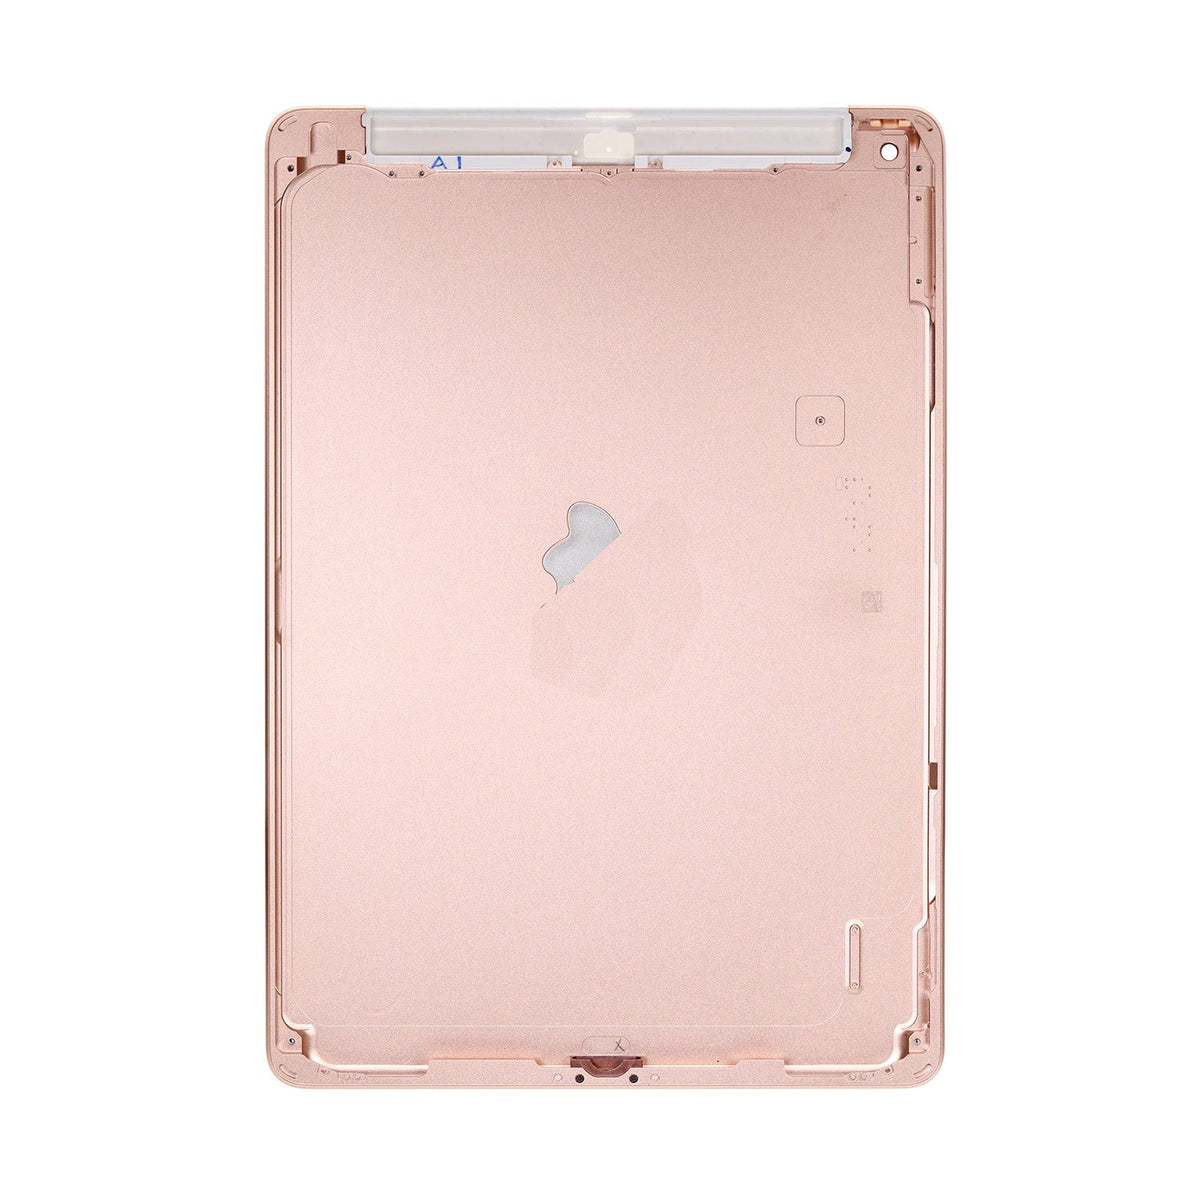 ROSE GOLD  BACK COVER (4G VERSION) FOR IPAD 7TH/8TH